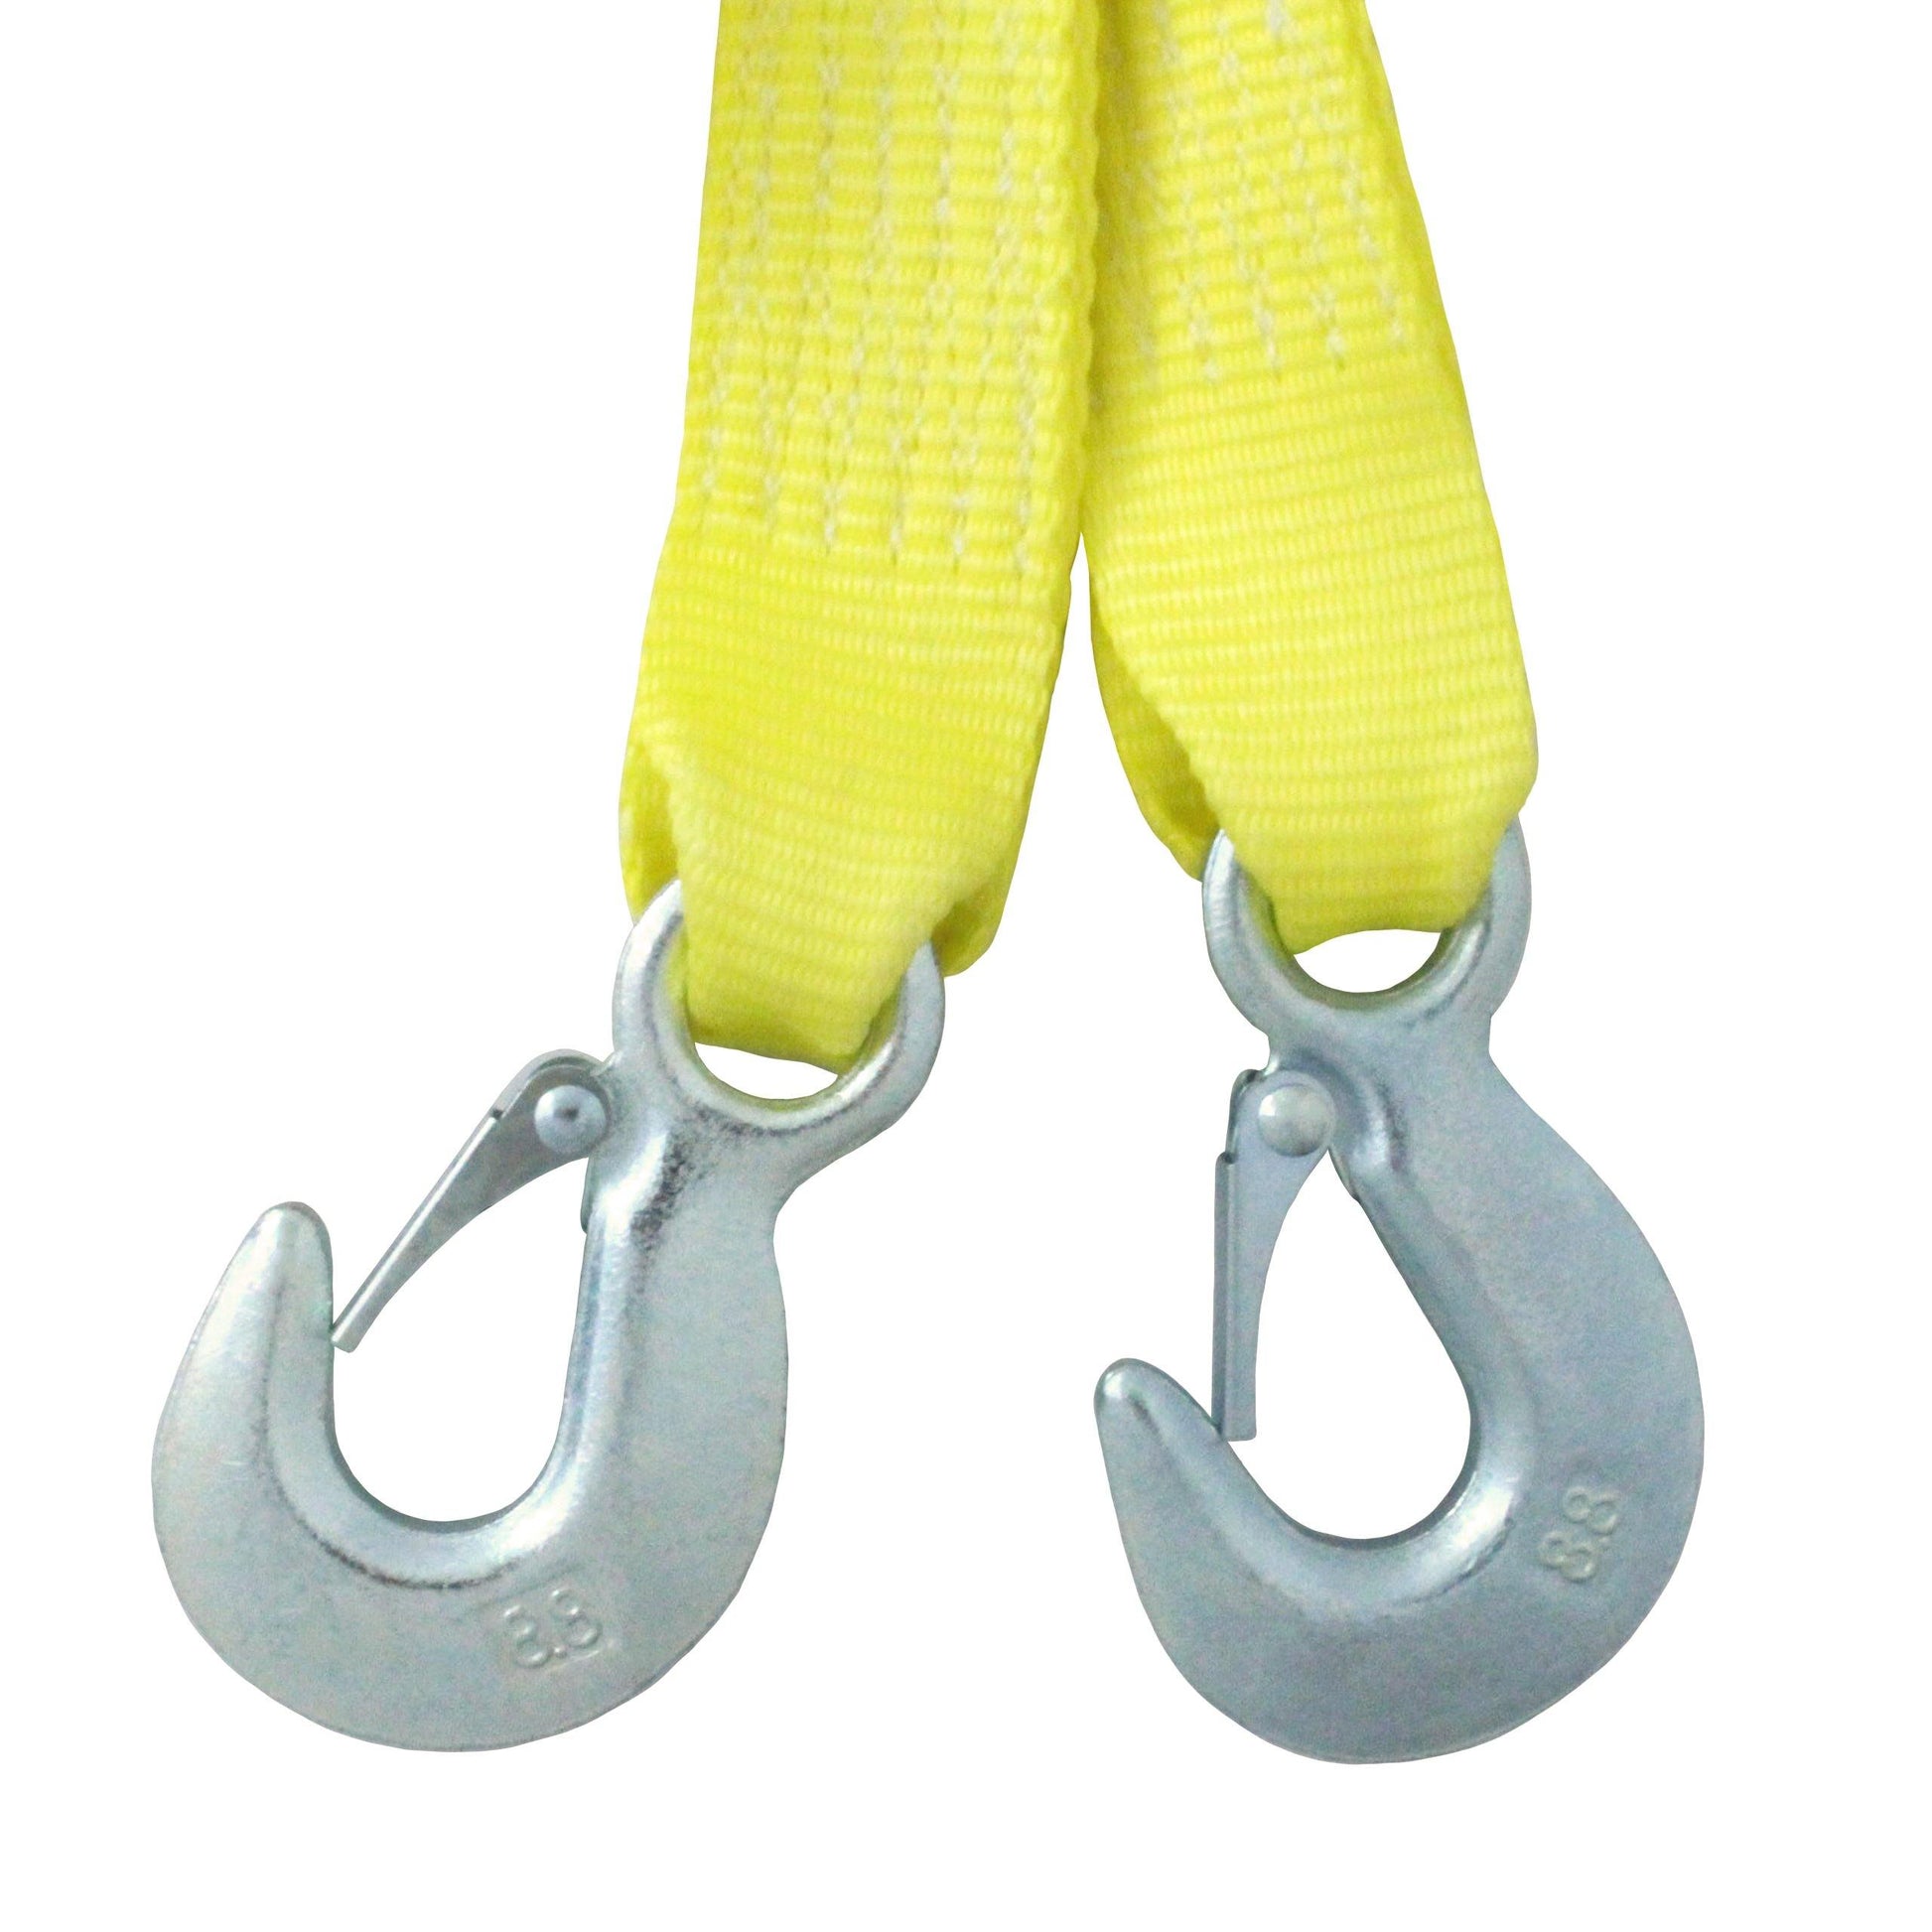 2 Inch Tow Strap with Safety Hook - Boxer Tools